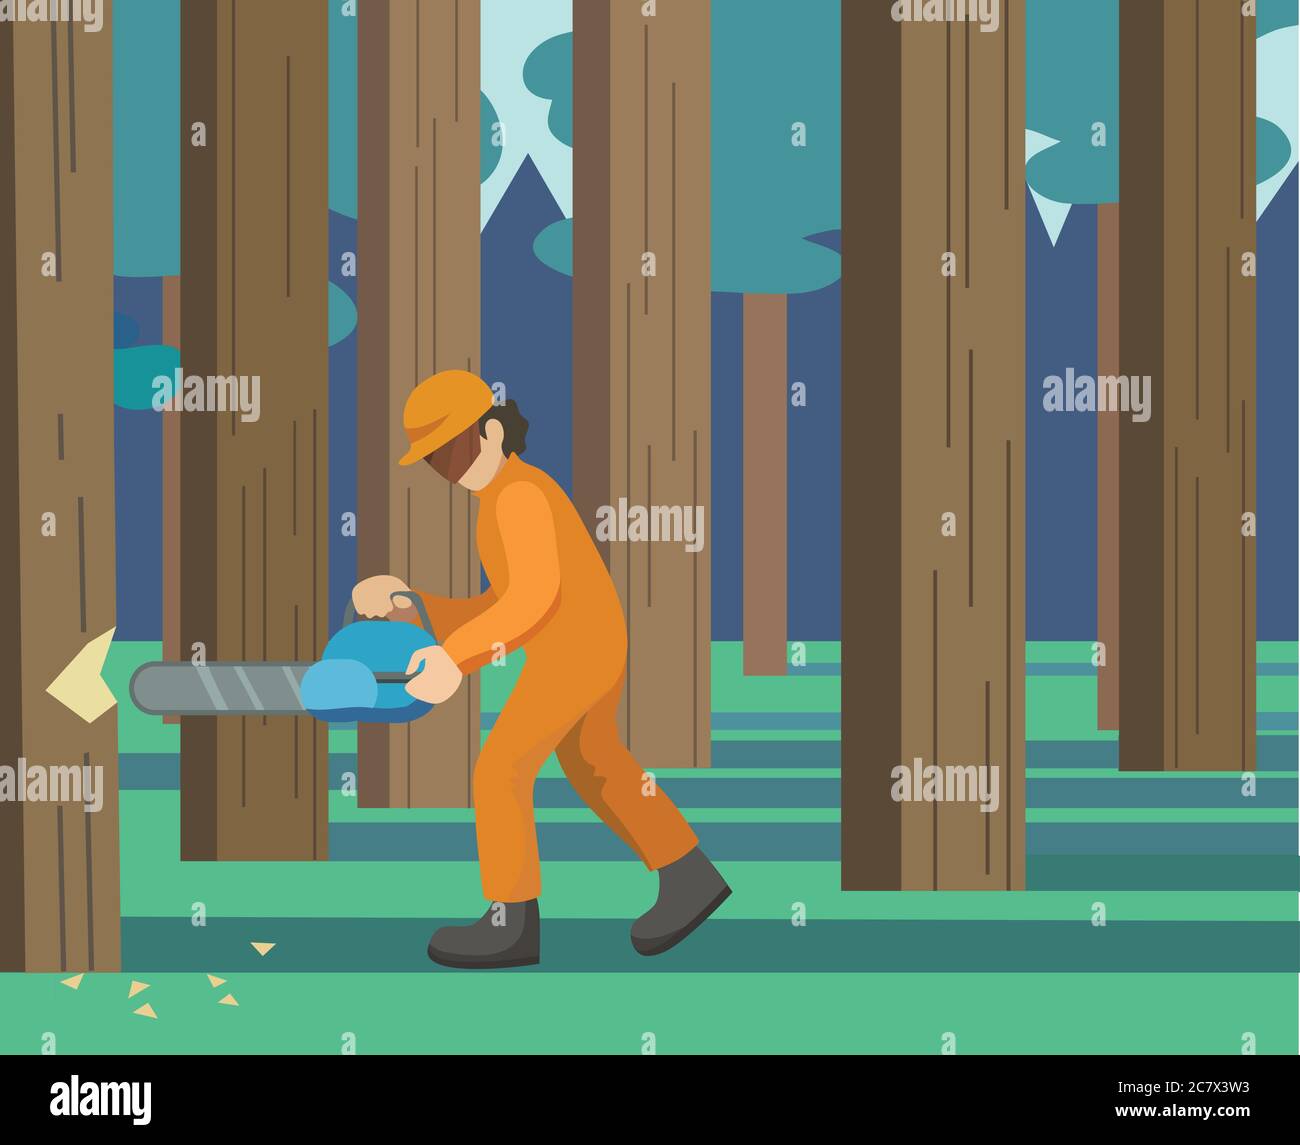 Vector illustration with lumber in the forest. Vector illustration of forestry industry. Stock Vector